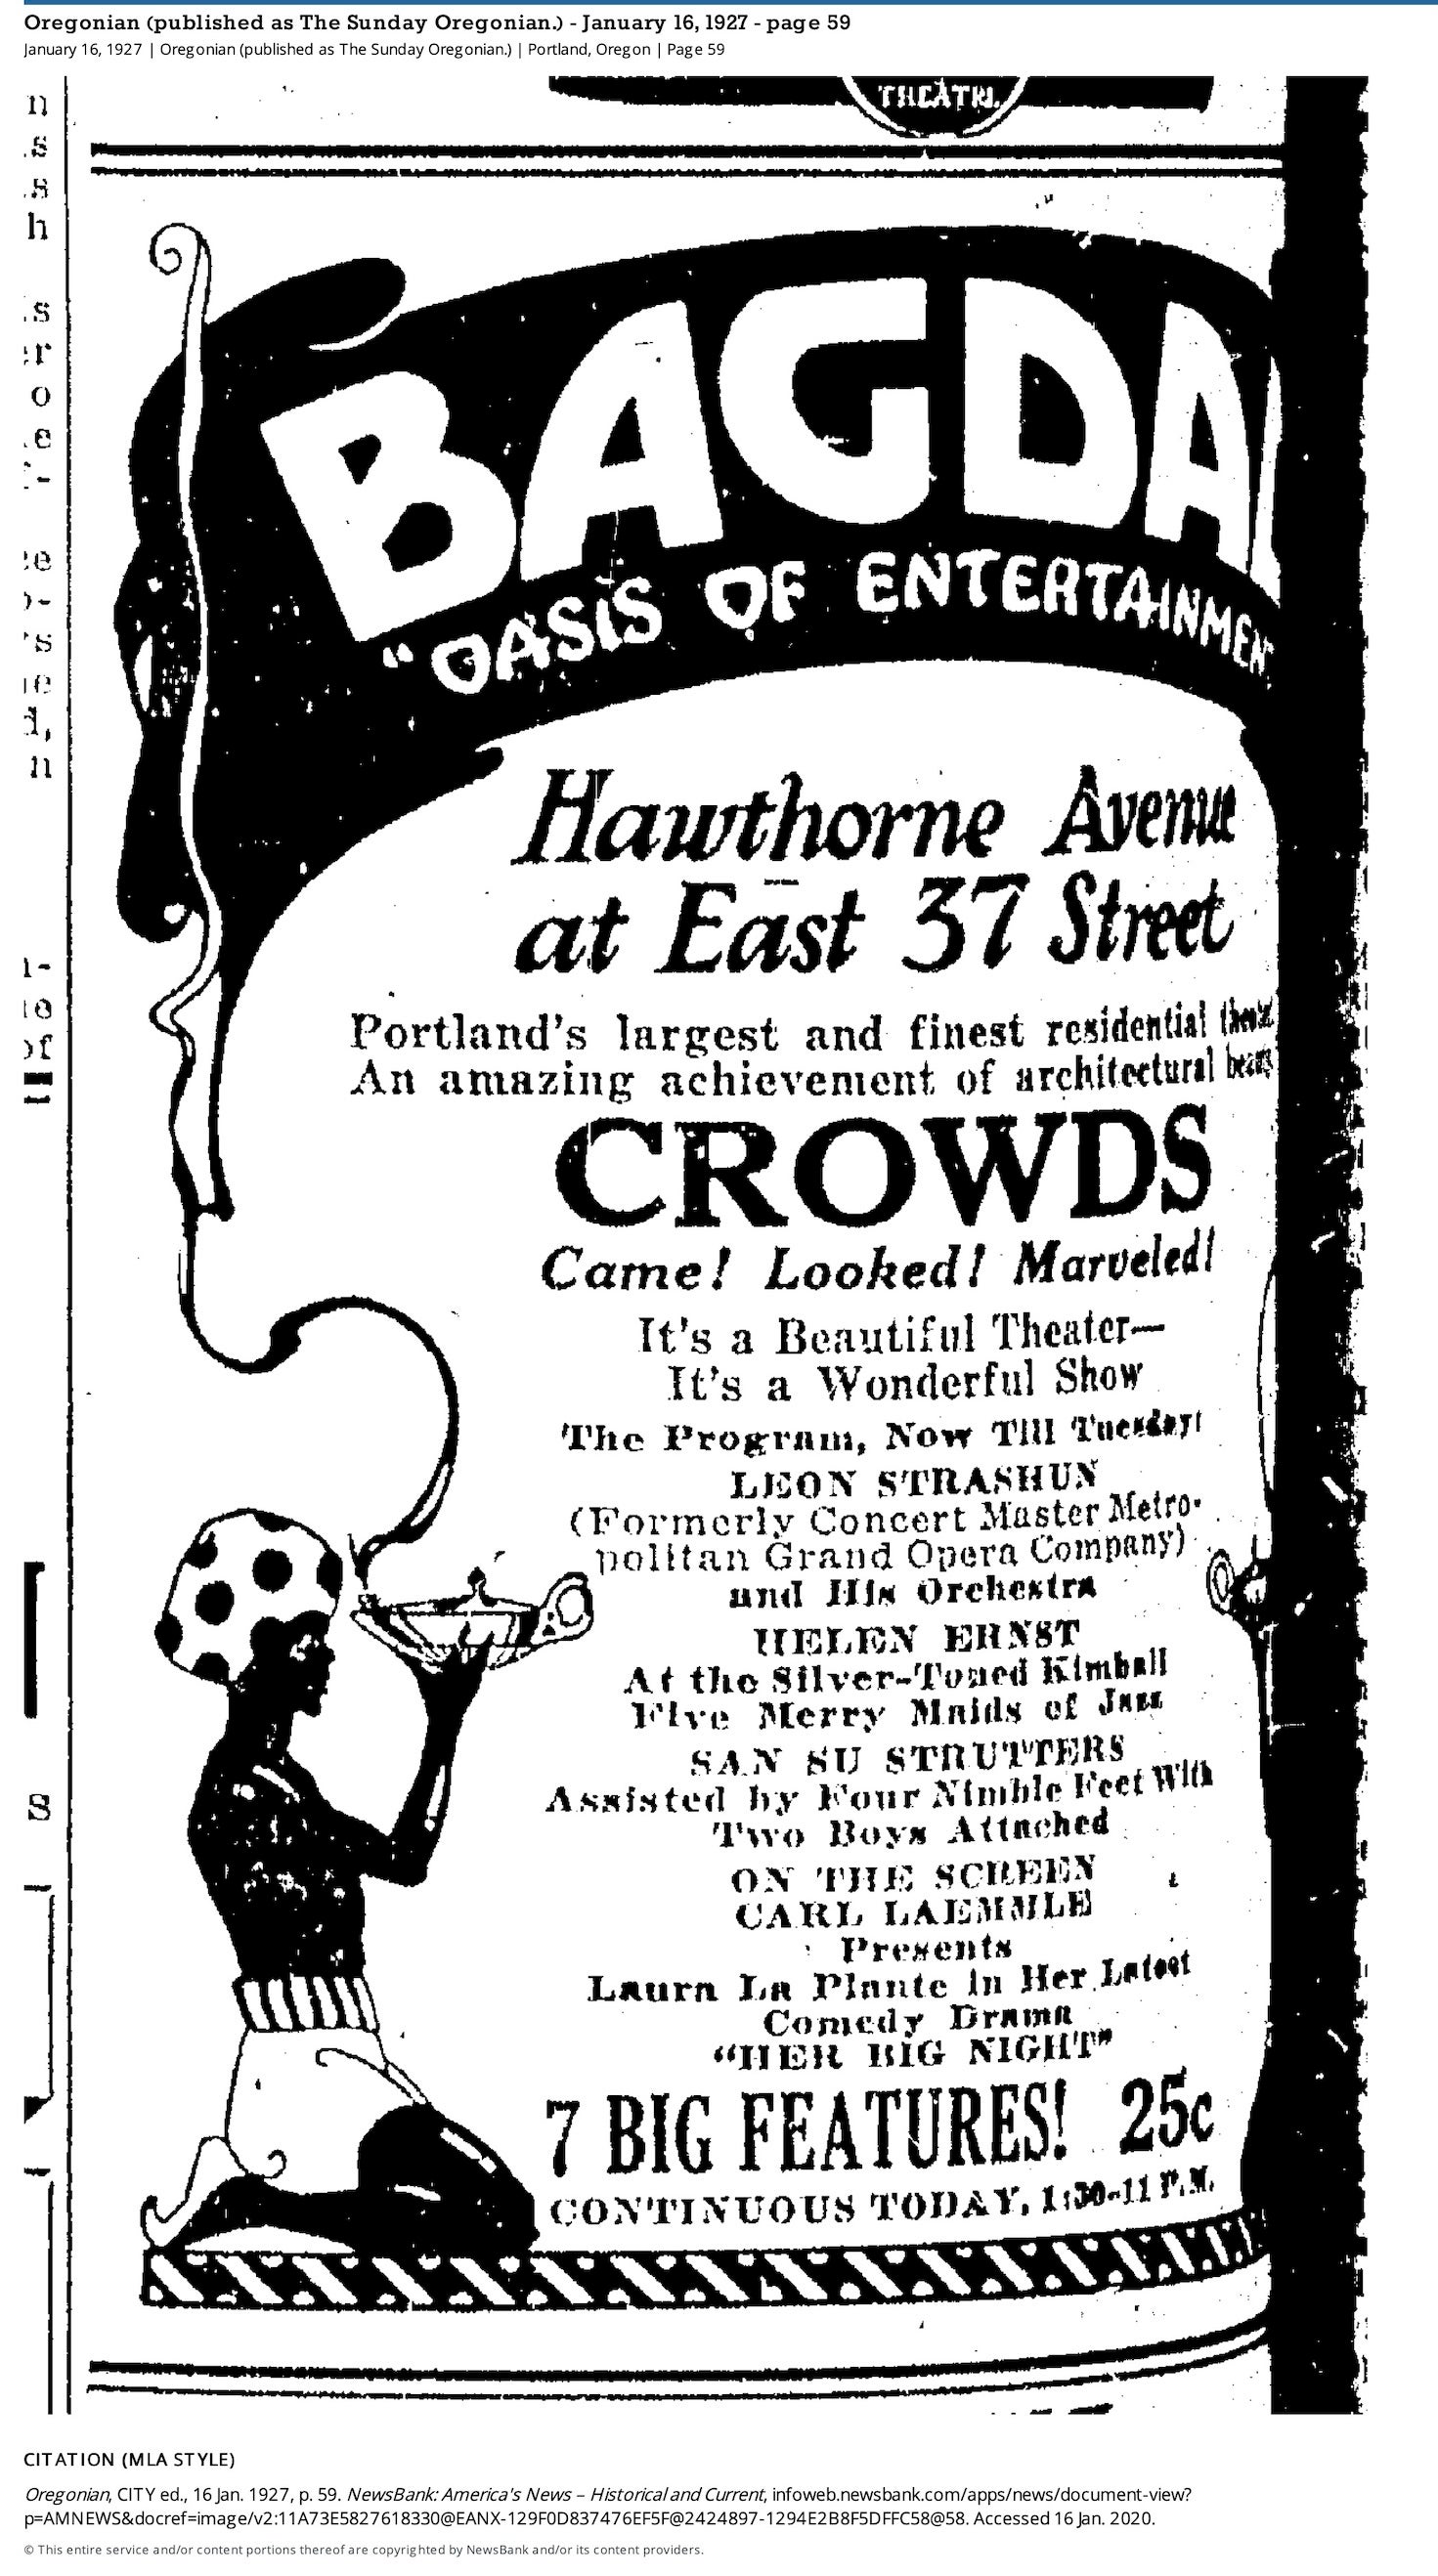 Newspaper advertisement for the Bagdad Theater